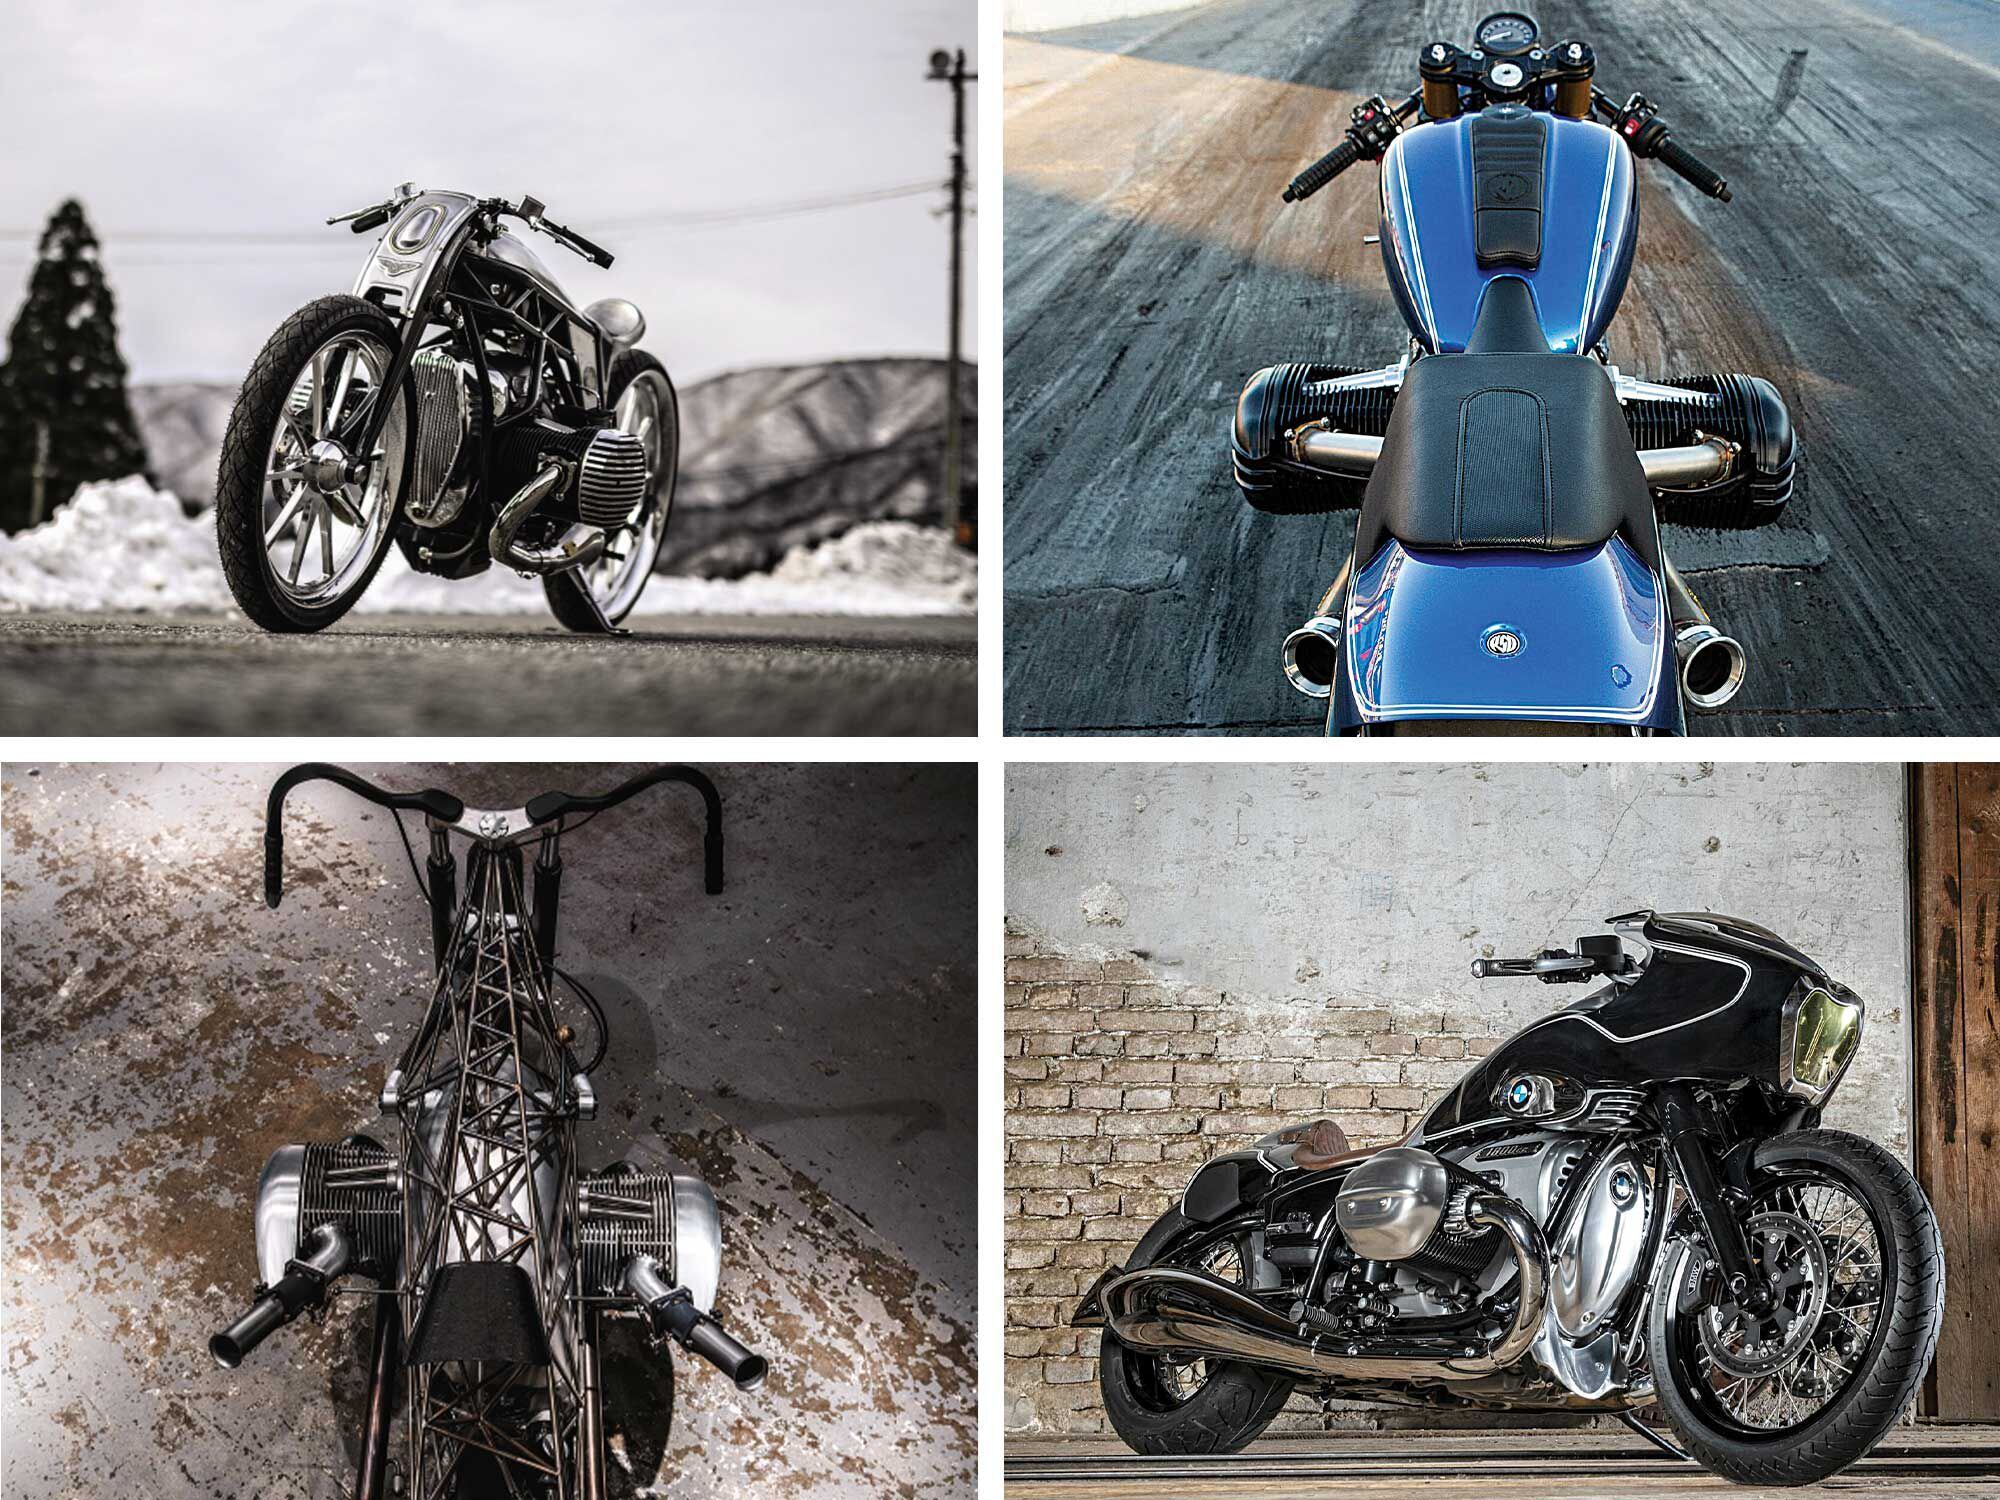 Clockwise from top left: Custom Works Zon’s Departed, Roland Sands’ Dragster, Blechmann’s R 18, and Revival Cycles’ Birdcage: four radically different customs used to herald the arrival of the 2021 BMW R 18.